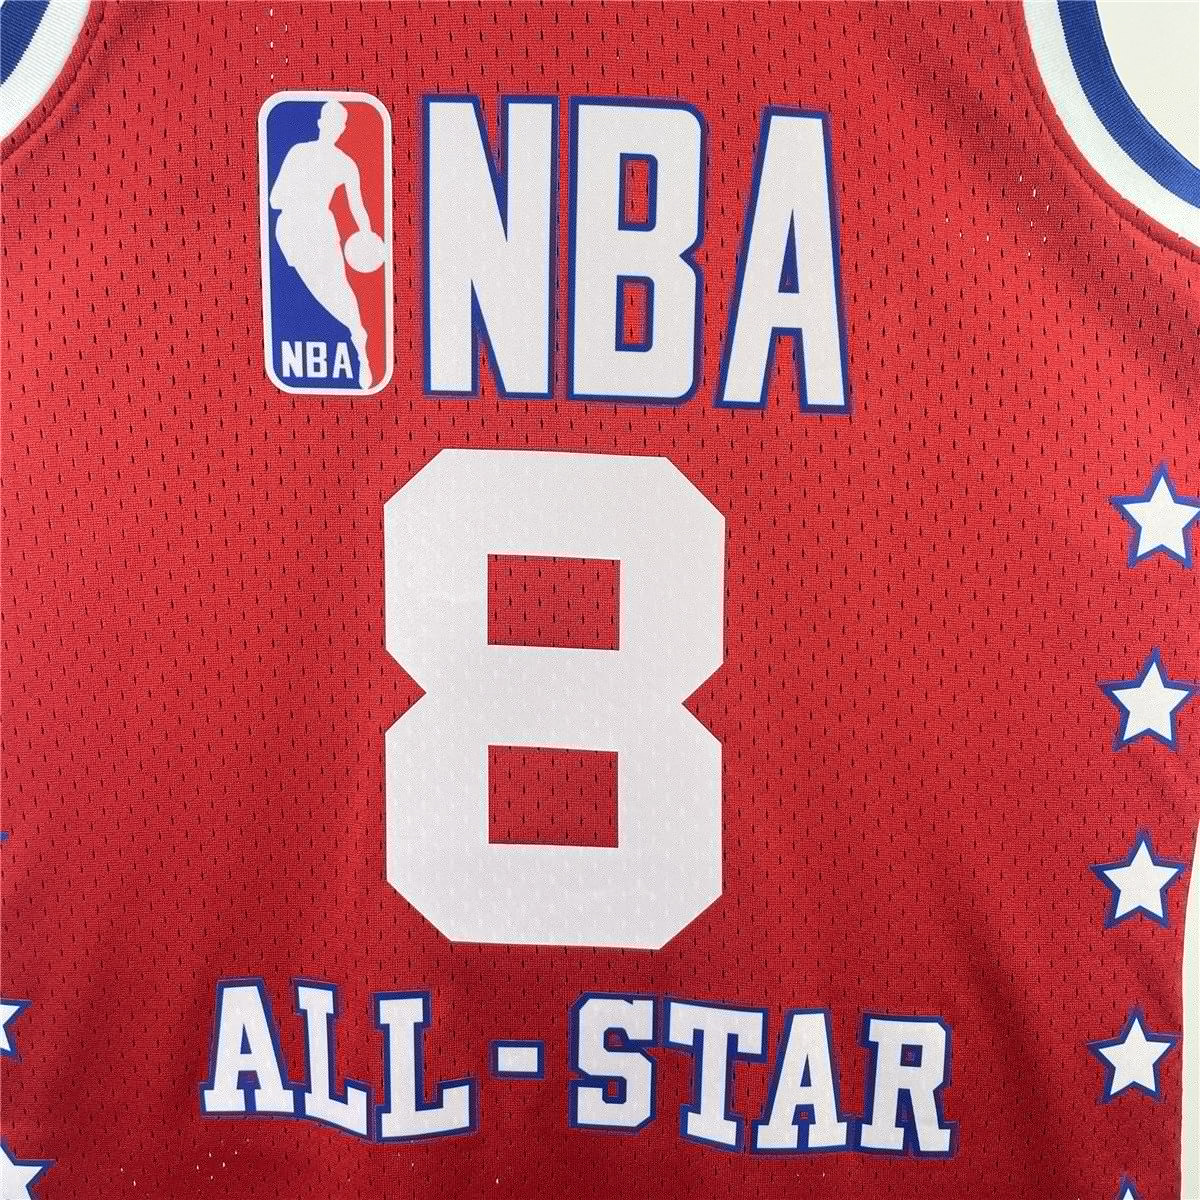 Western Conference Mitchell & Ness Red All-Star Game Swingman Jersey Mens 2003 #BRYANT - 8